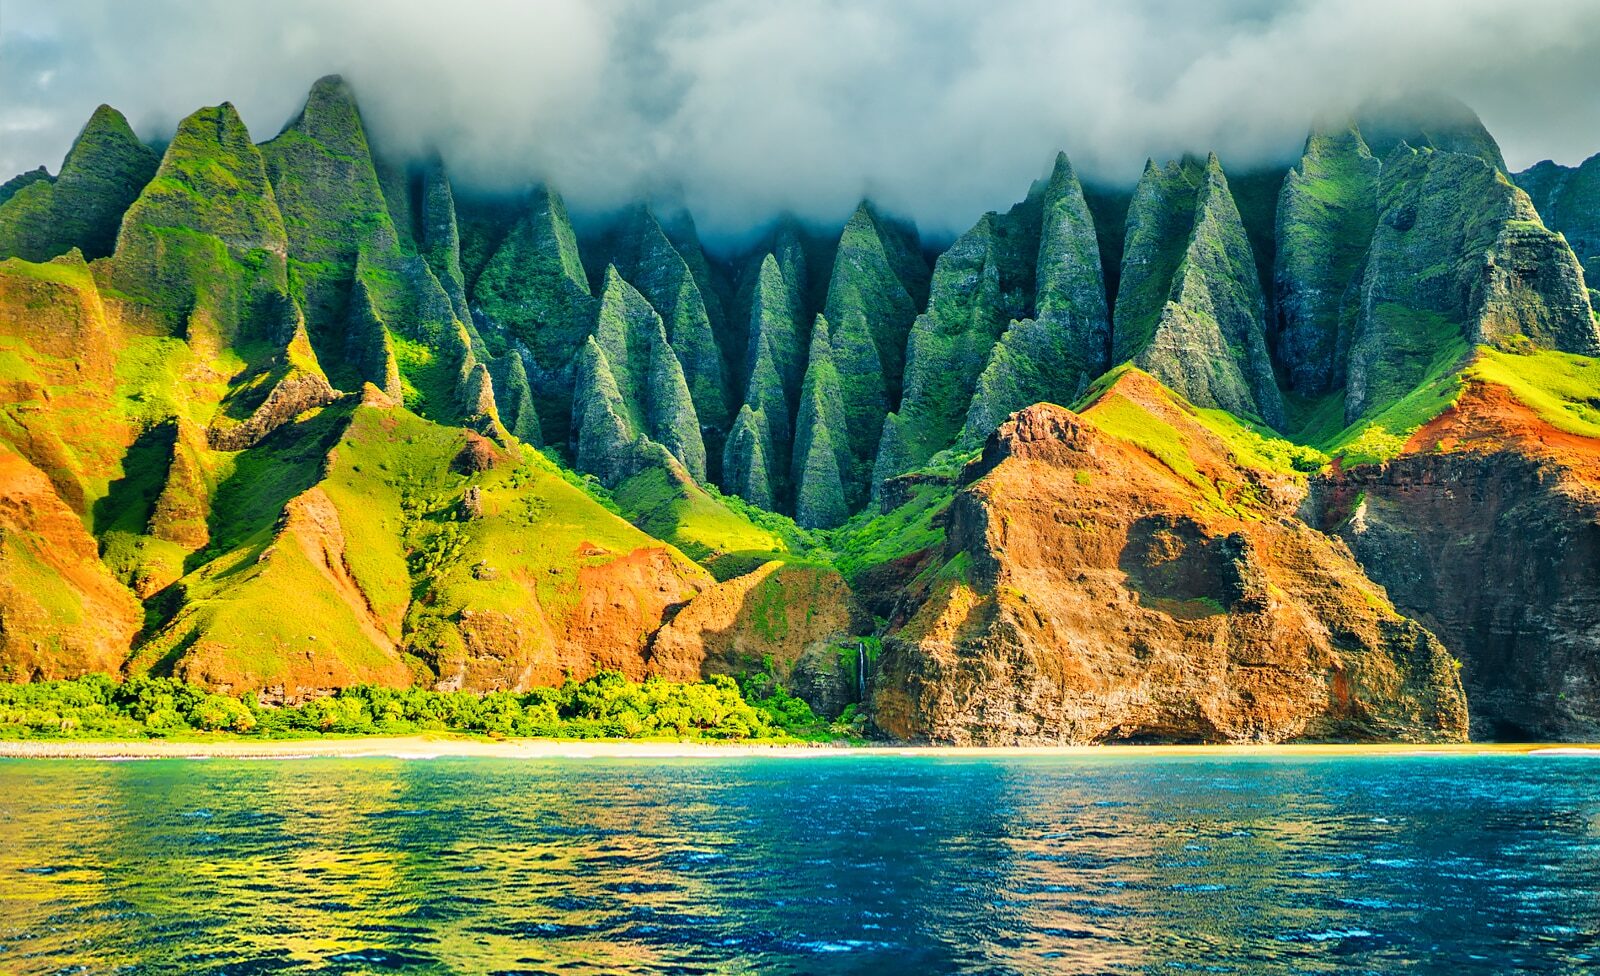 One-way flights from Vancouver to Kauai (Hawaii) in March-April for only 137 CAD including GST🔥